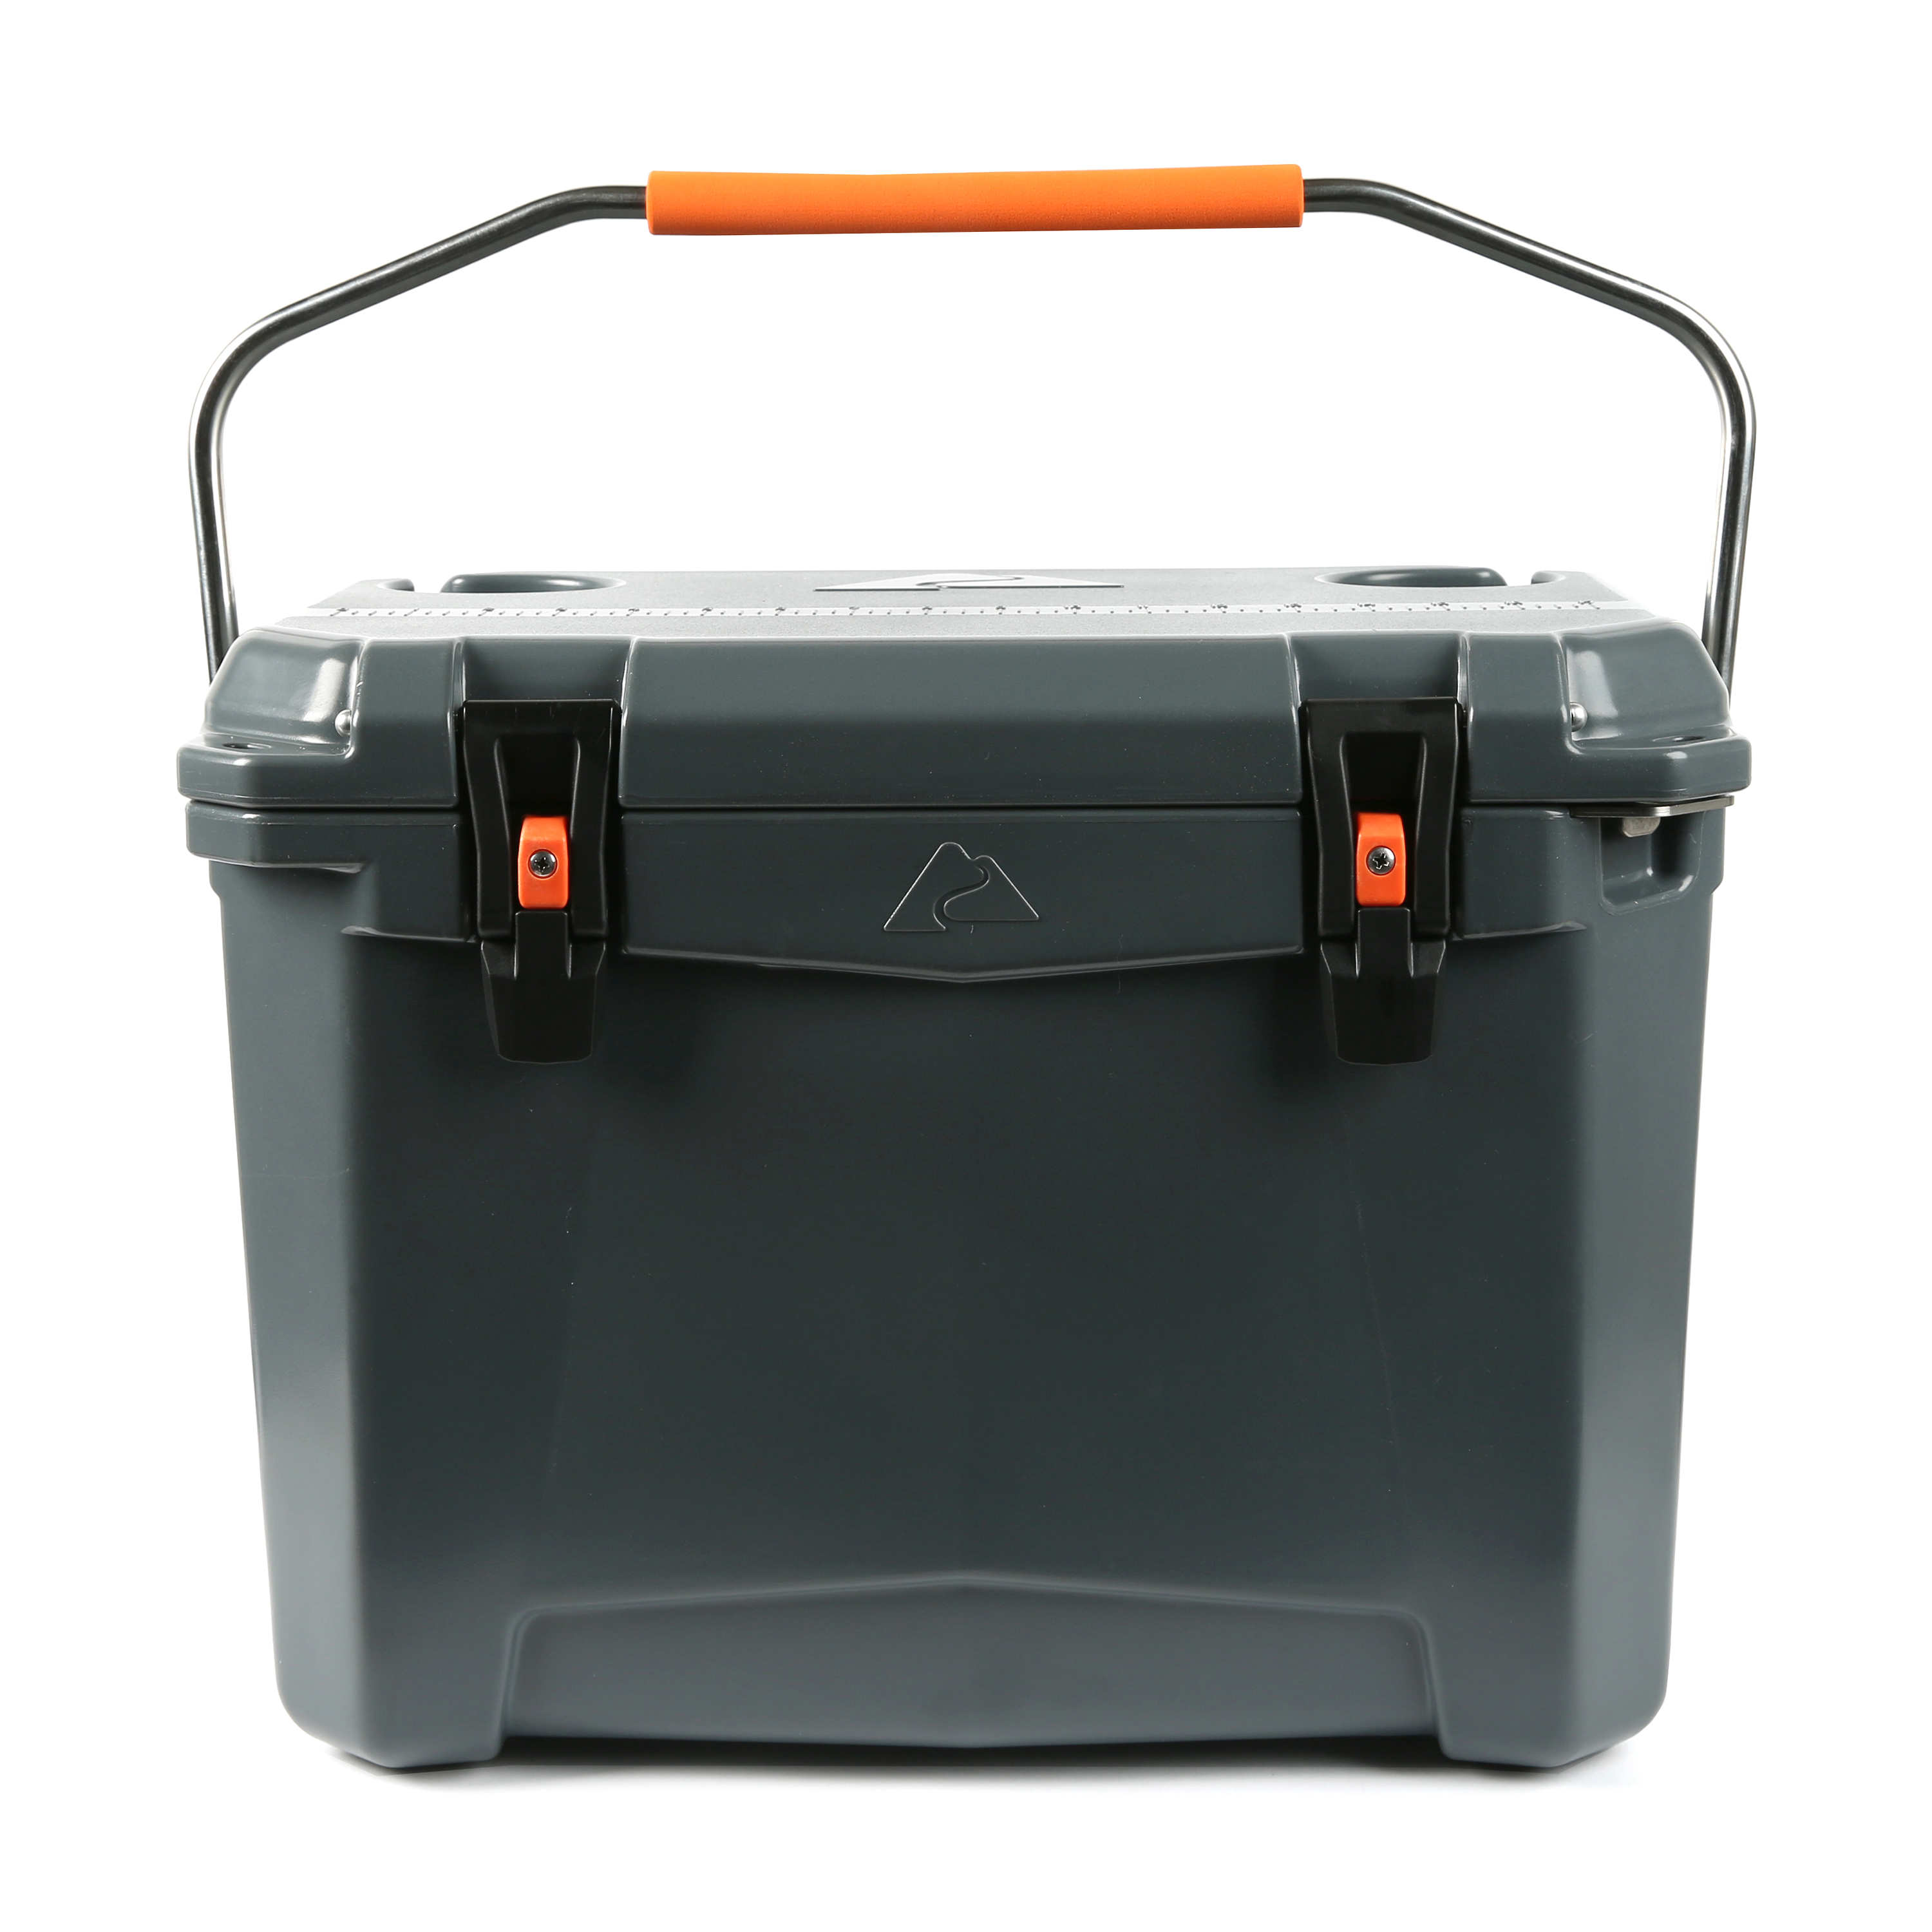 Ozark Trail 26 Quart High Performance Roto-Molded Cooler with Microban®, Grey - image 1 of 15